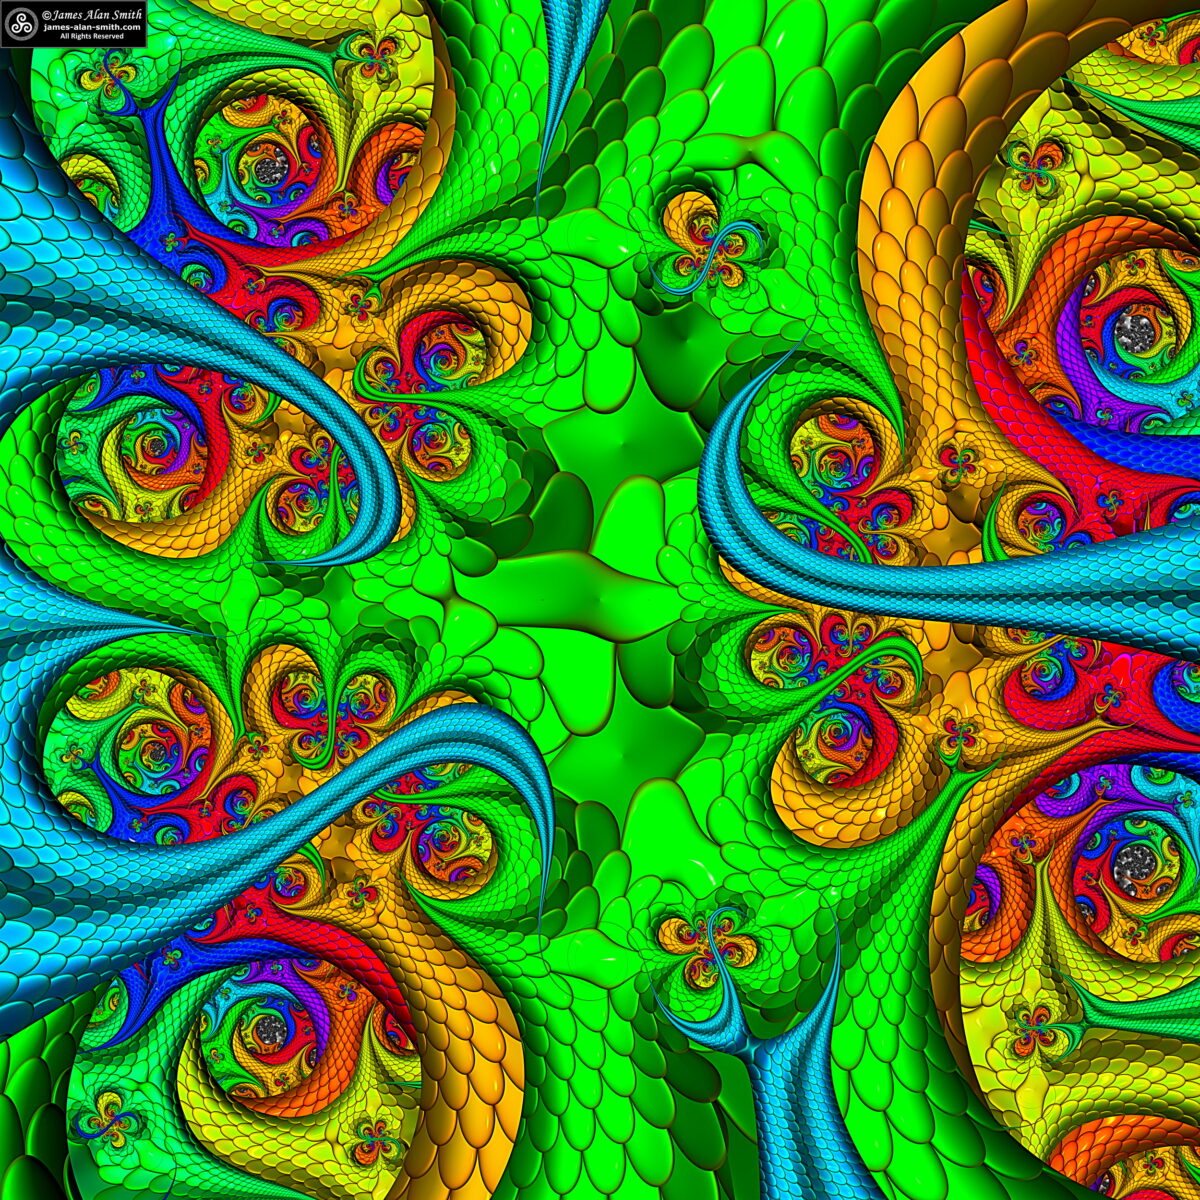 Colorful Whirlpools: Artwork by James Alan Smith